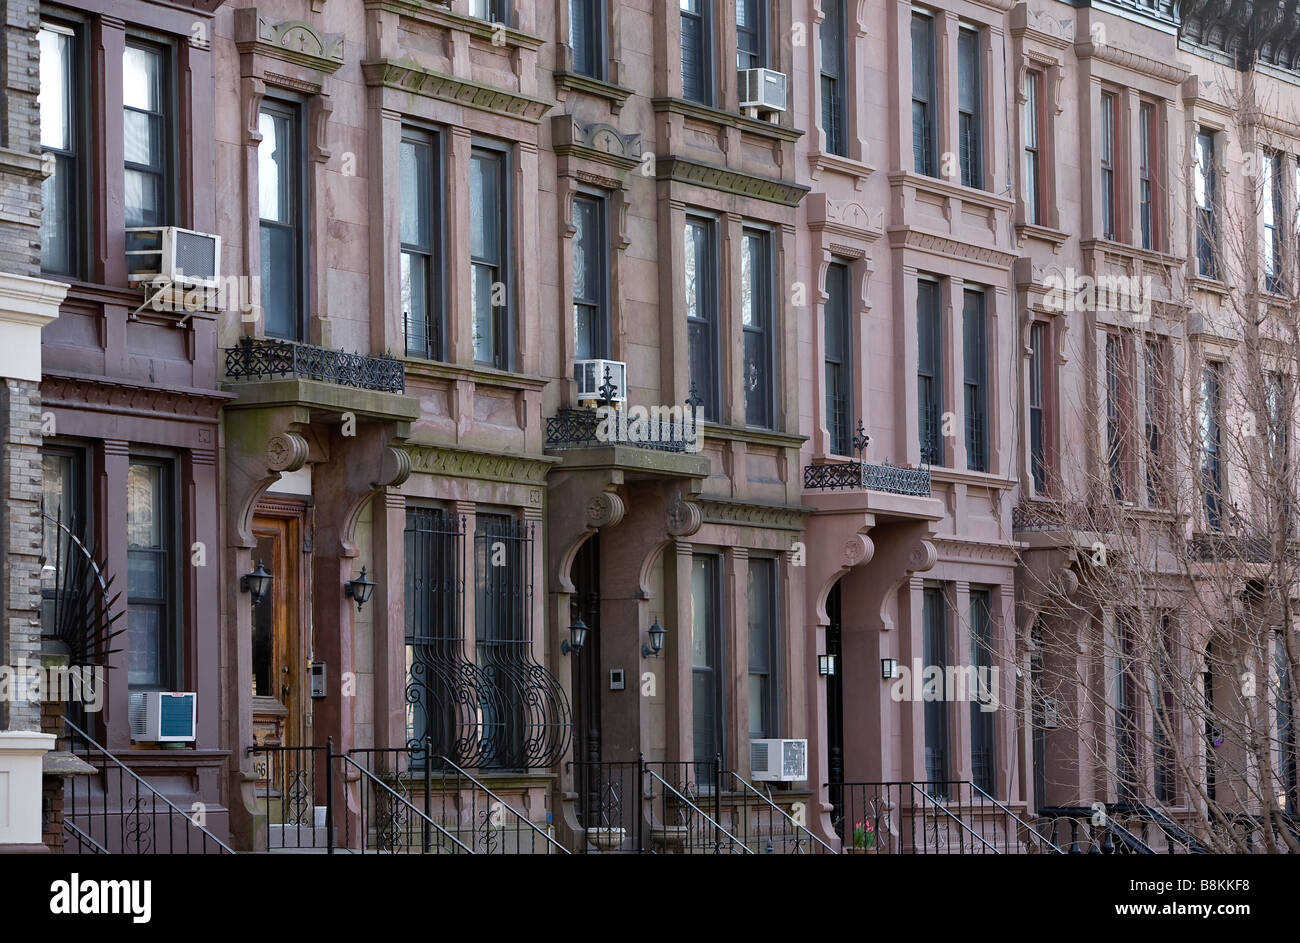 Brooklyn brownstone row houses lined up in the Park Slope section of Brooklyn, NY USA Stock Photo